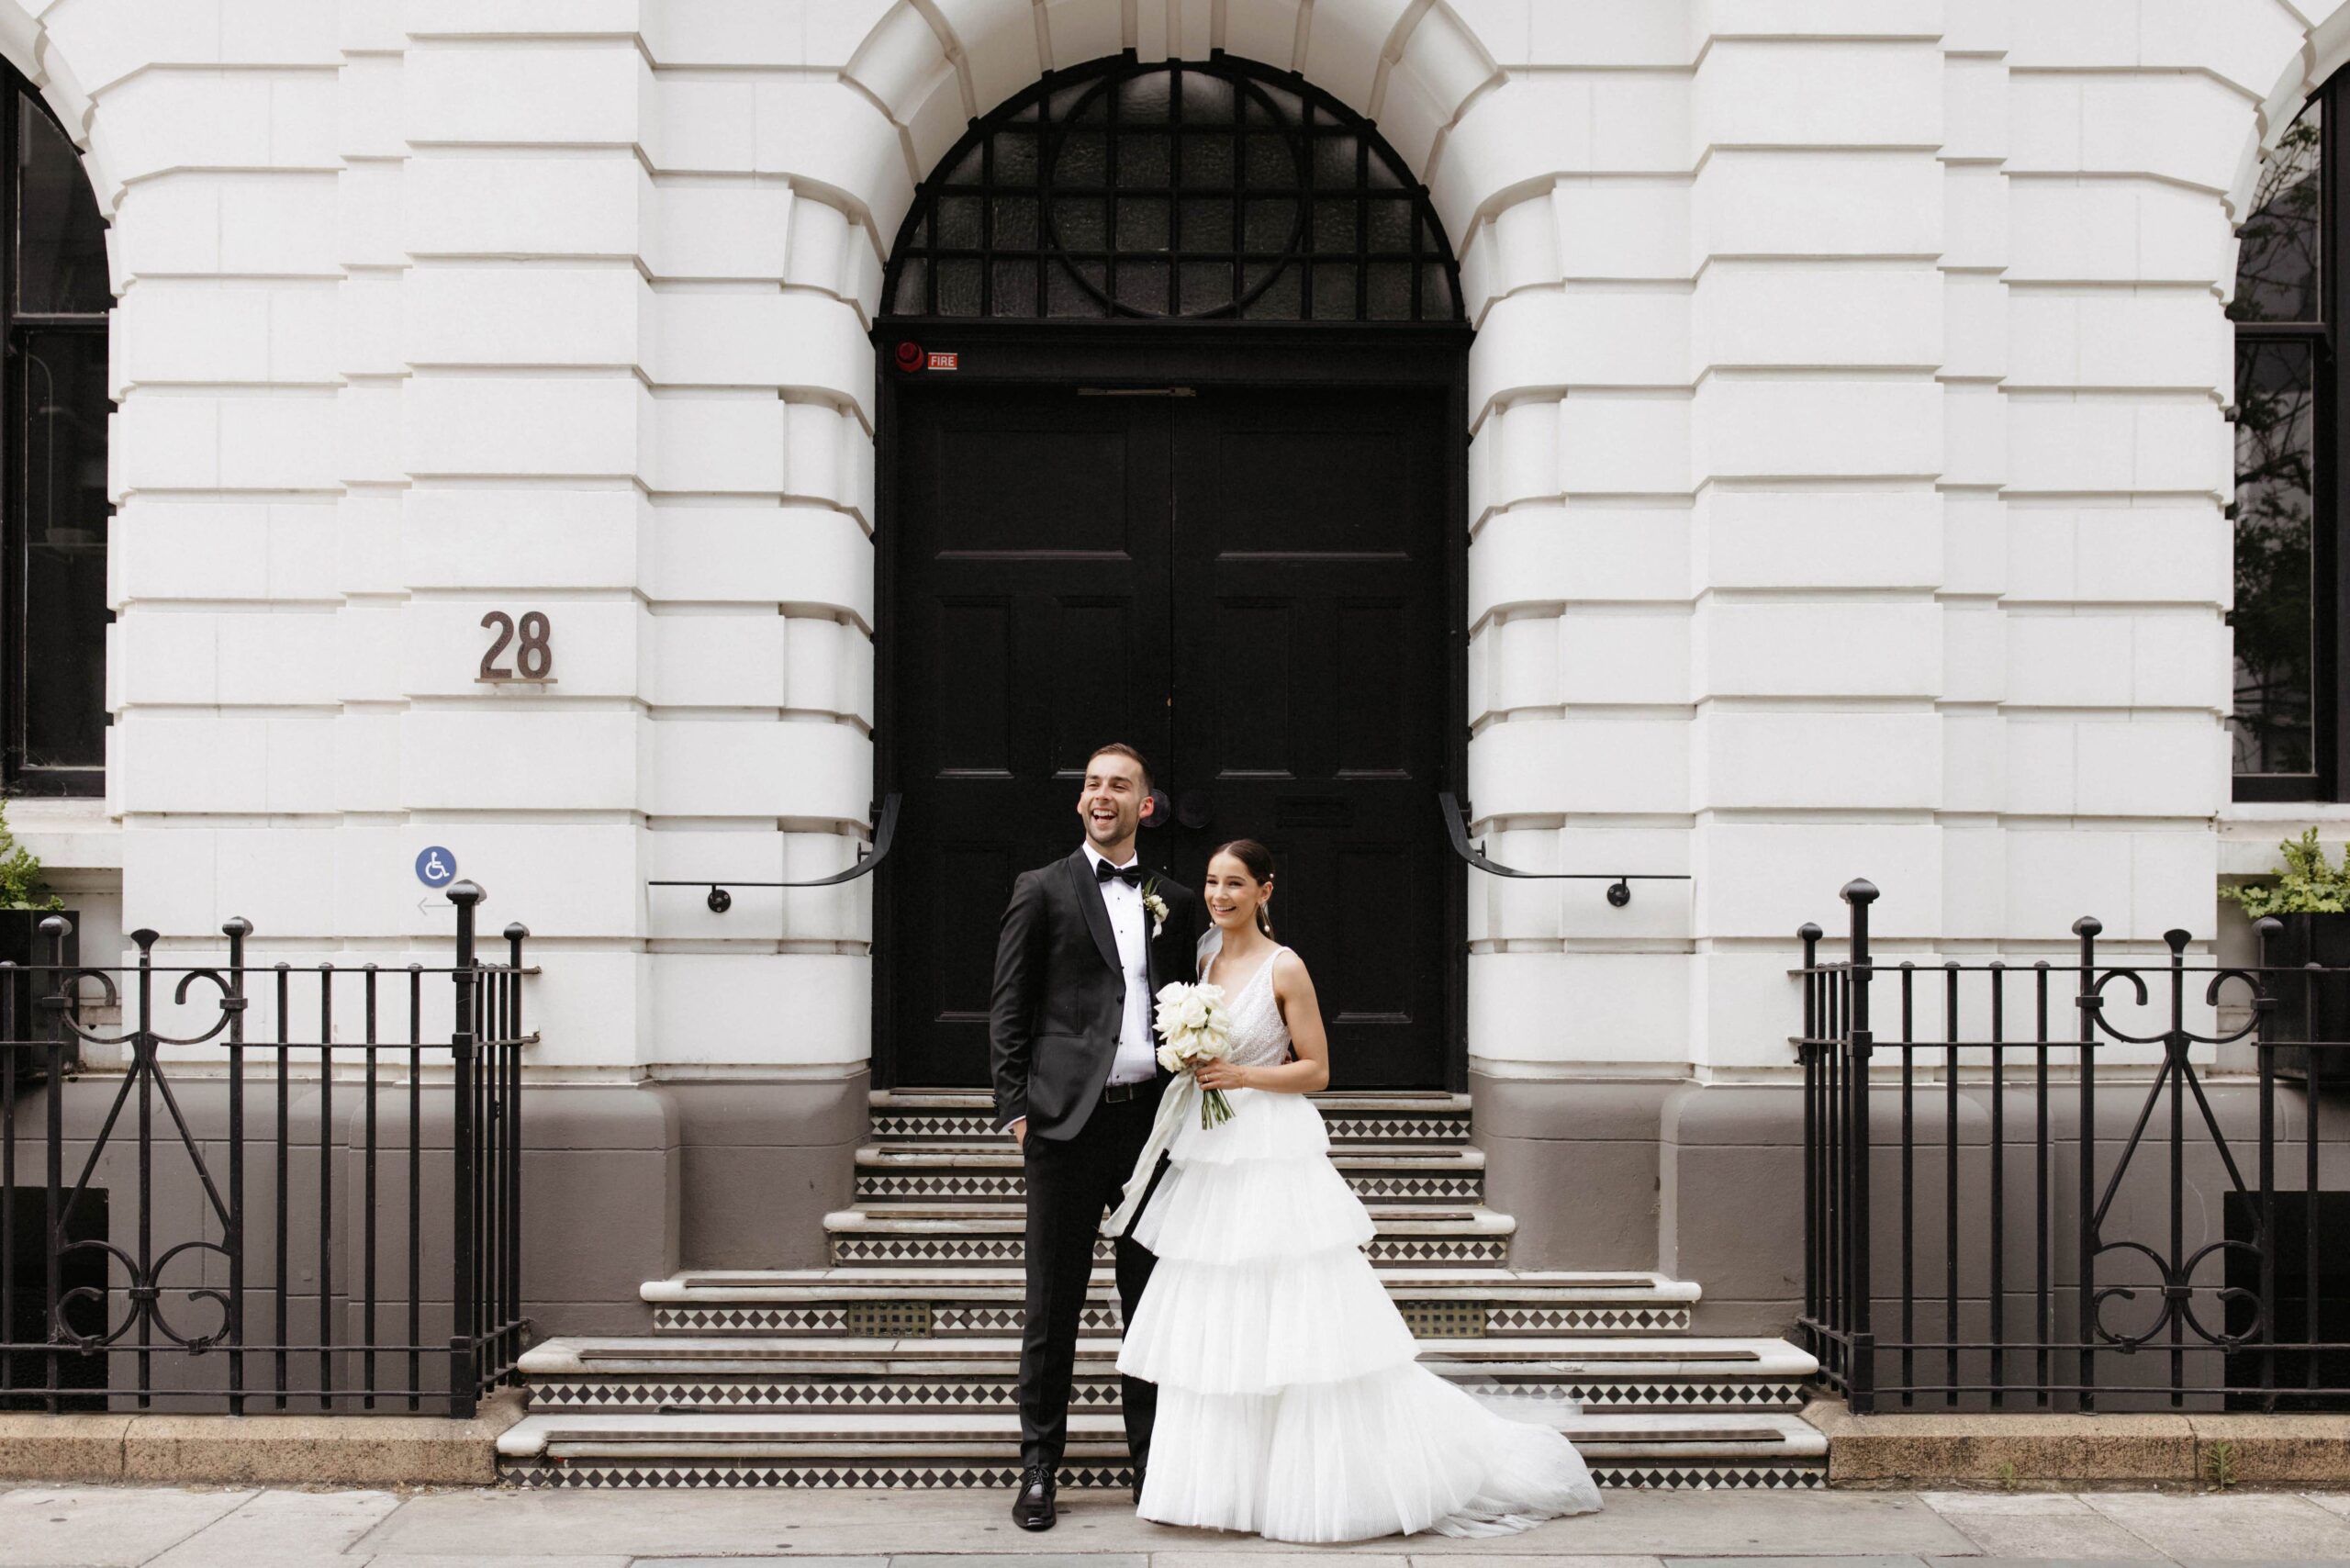 Bethany and Daniel photographed standing in front of a white brick city building